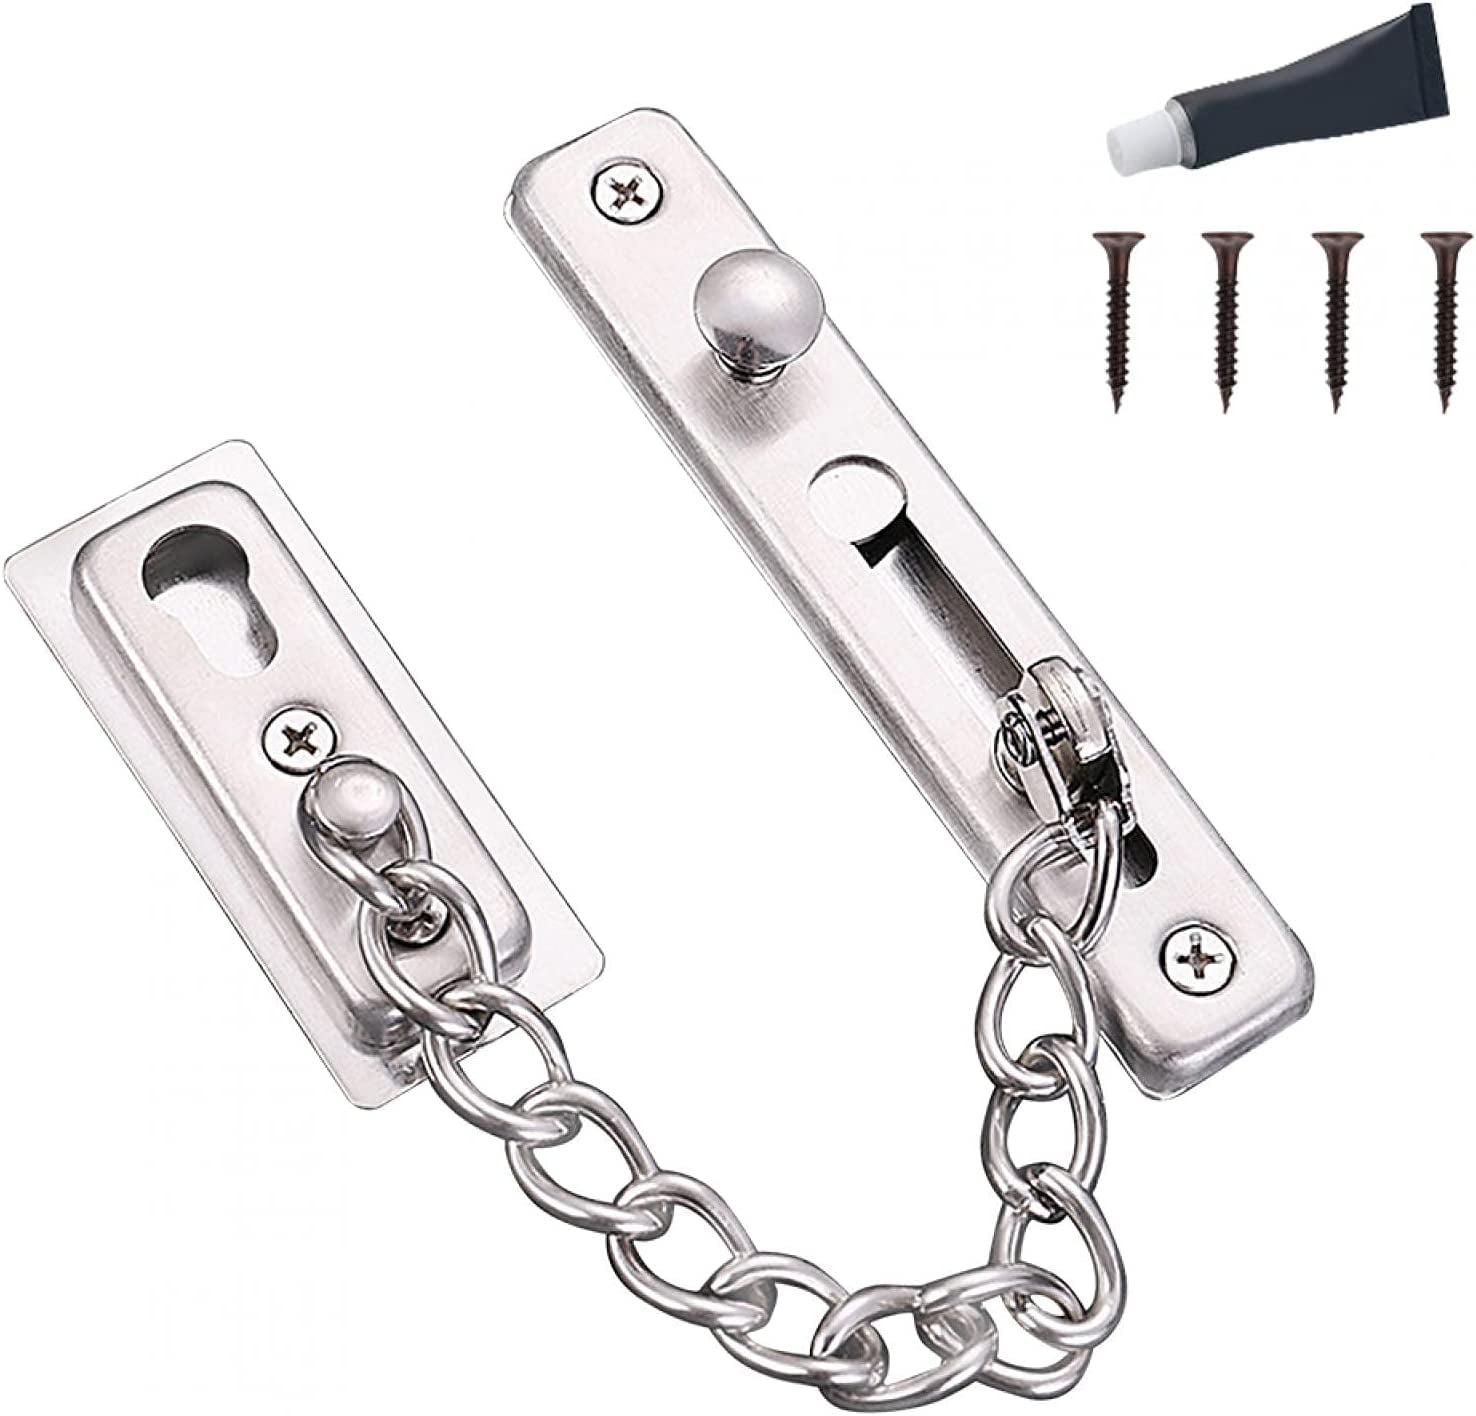 Door Chain Lock. Stainless Steel Security Chain Guard with an ti-Theft Chain.  Heavy Duty Reinforced Safety Door Latch Lock for Home Bedroom Hotel  Office(Silver) 